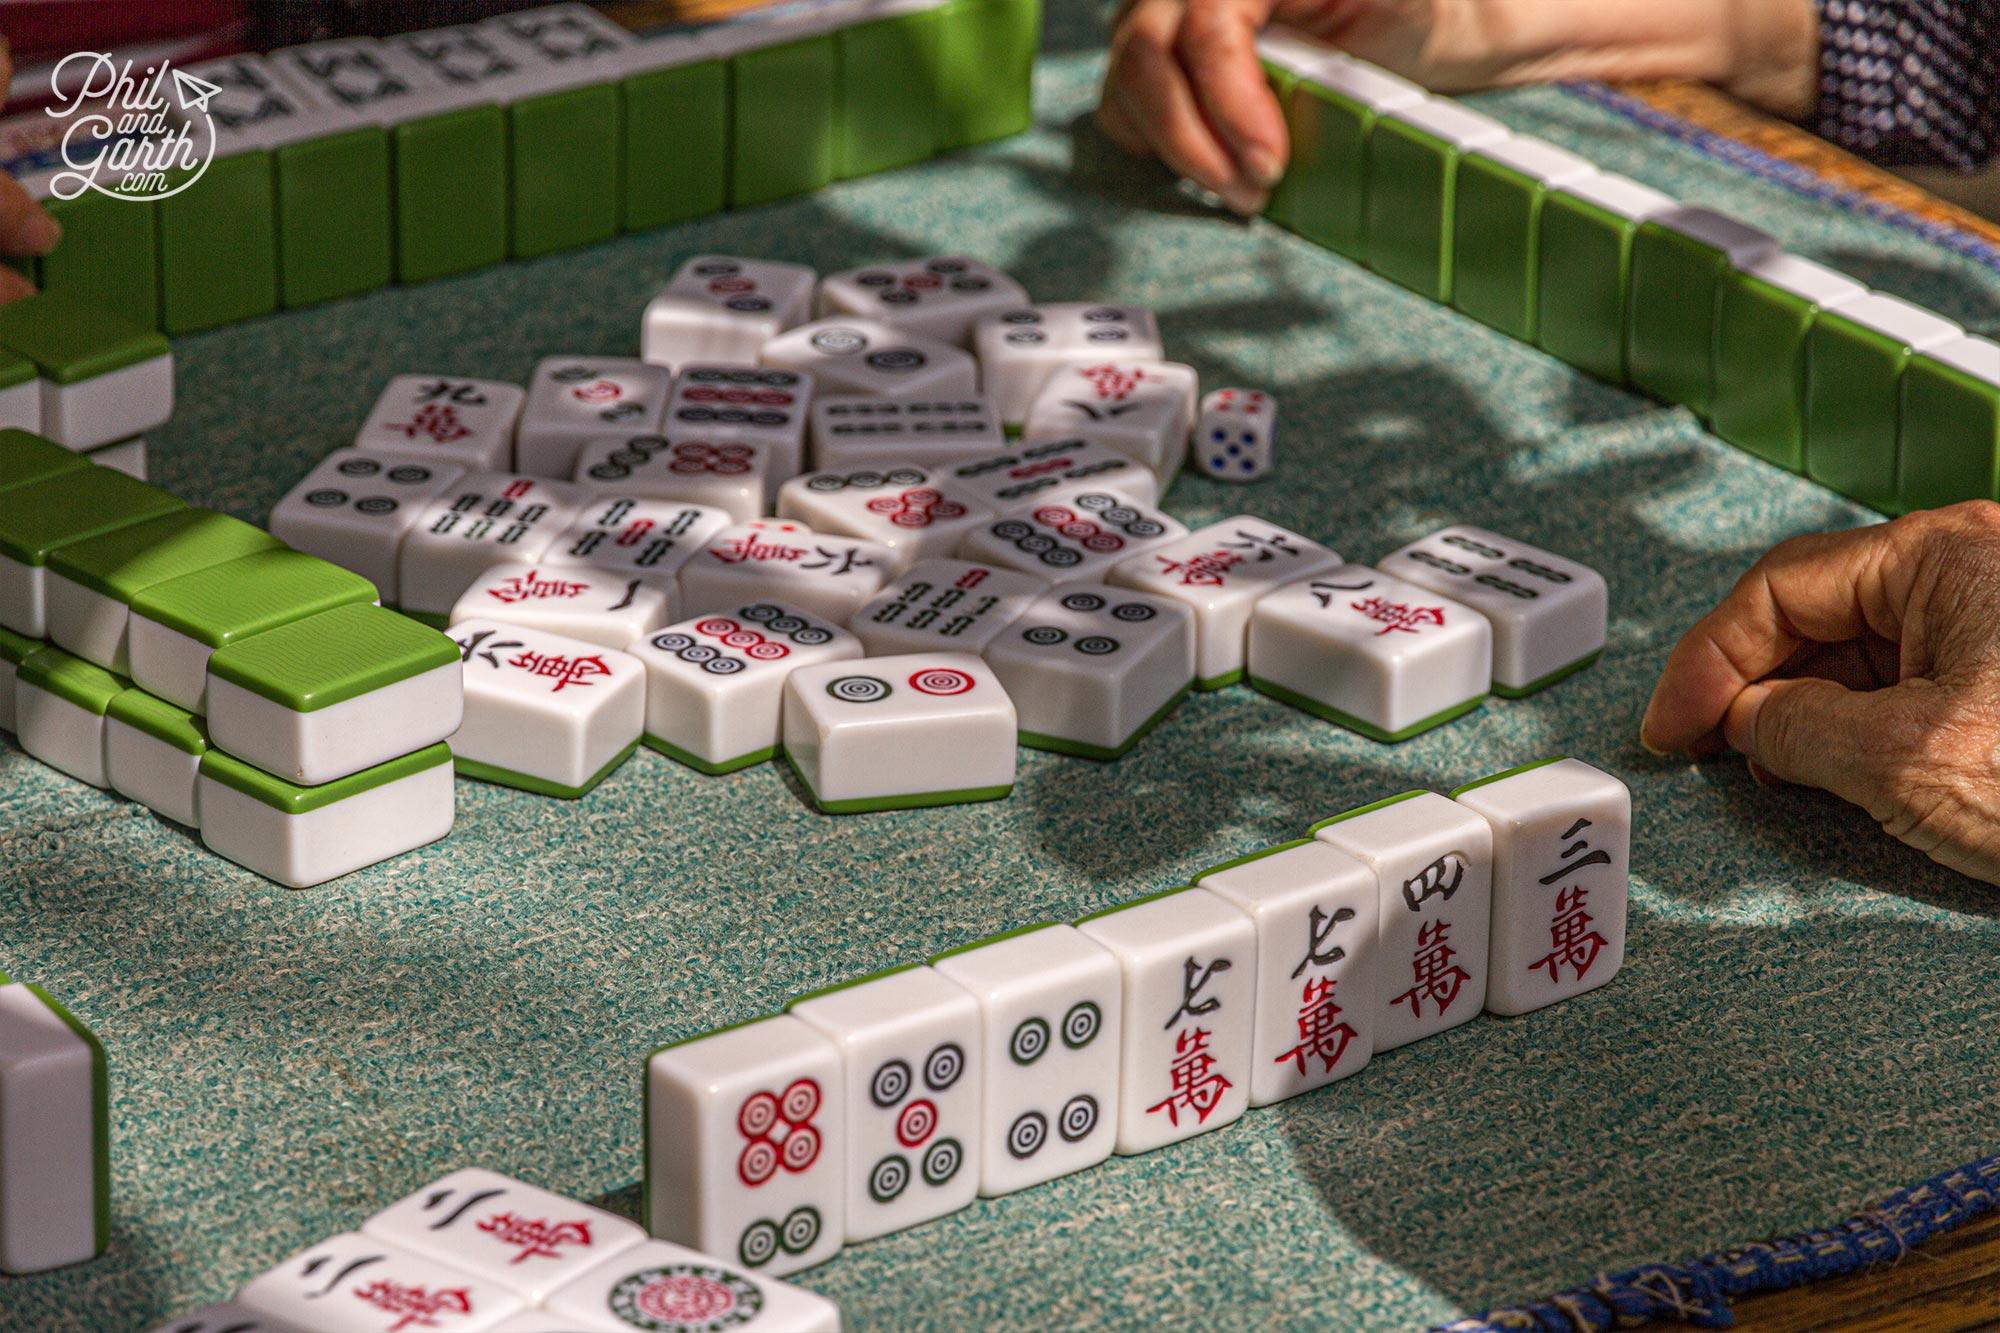 Mahjong is similar to rummy - the card game